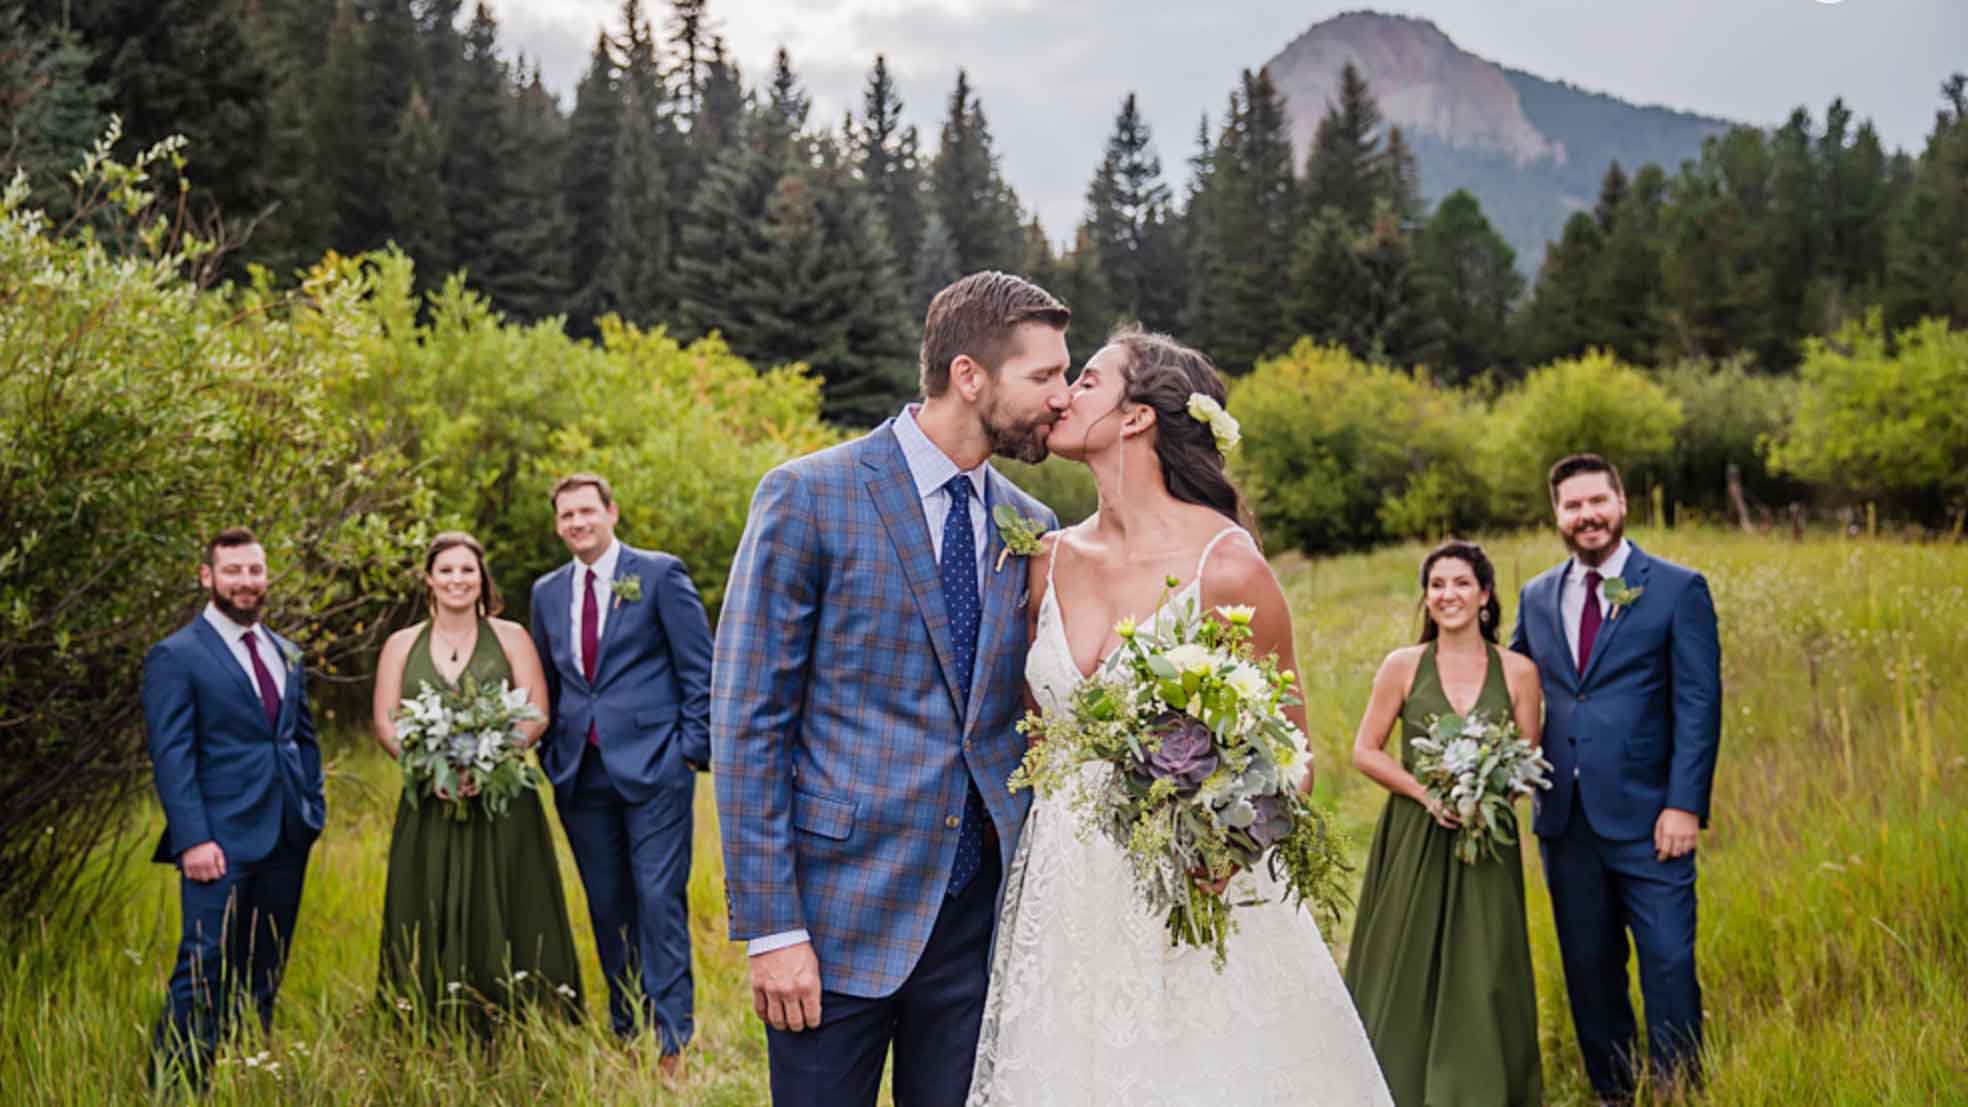 High-Fashion Mountain Wedding With Plaid Suit Jacket